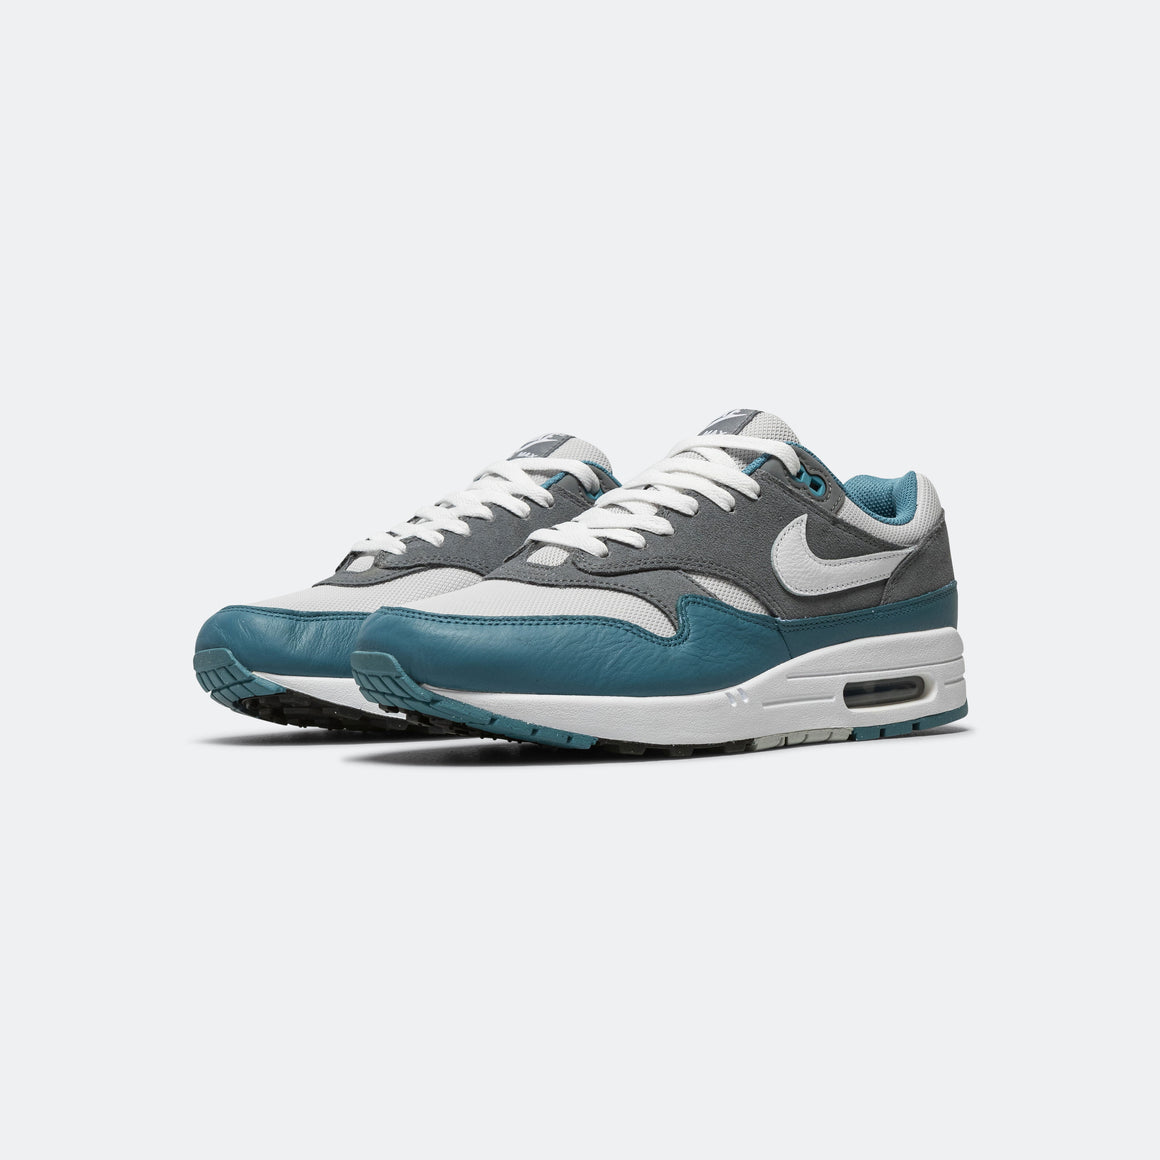 Nike - Air Max 1 SC - Photon Dust/White-Cool Grey-Noise Aqua - UP THERE